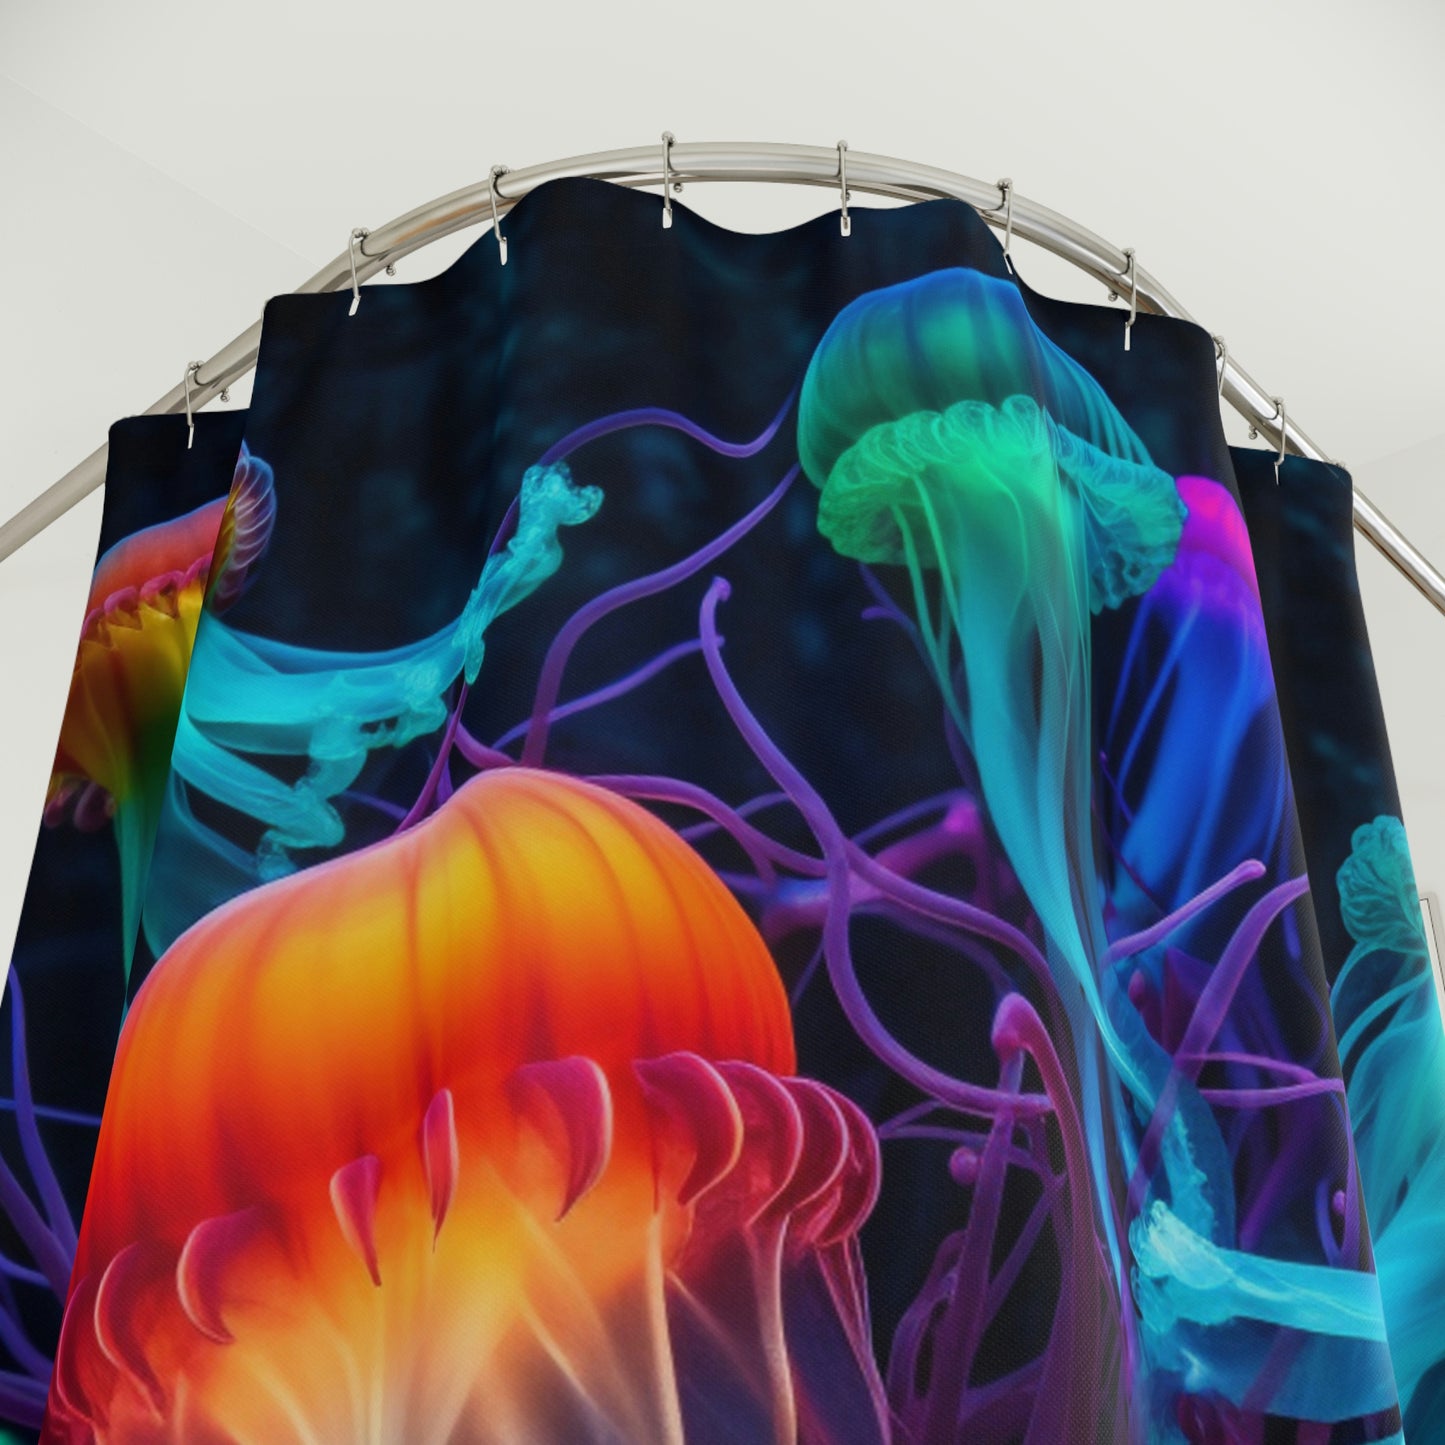 Polyester Shower Curtain neon party jelly 1